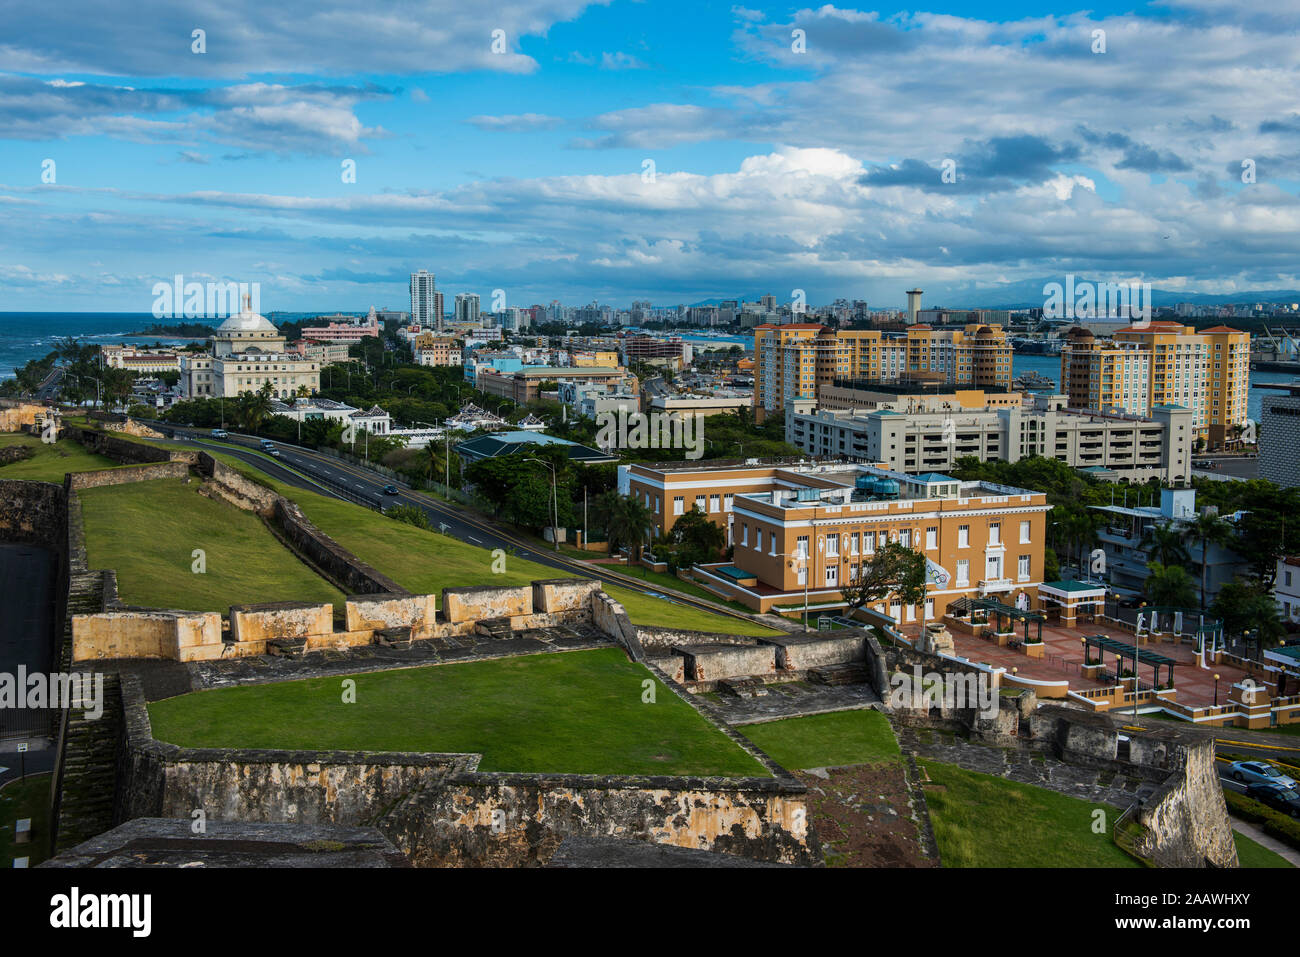 Aerial view of buildings against cloudy sky in city, Puerto Rico, Caribbean Stock Photo